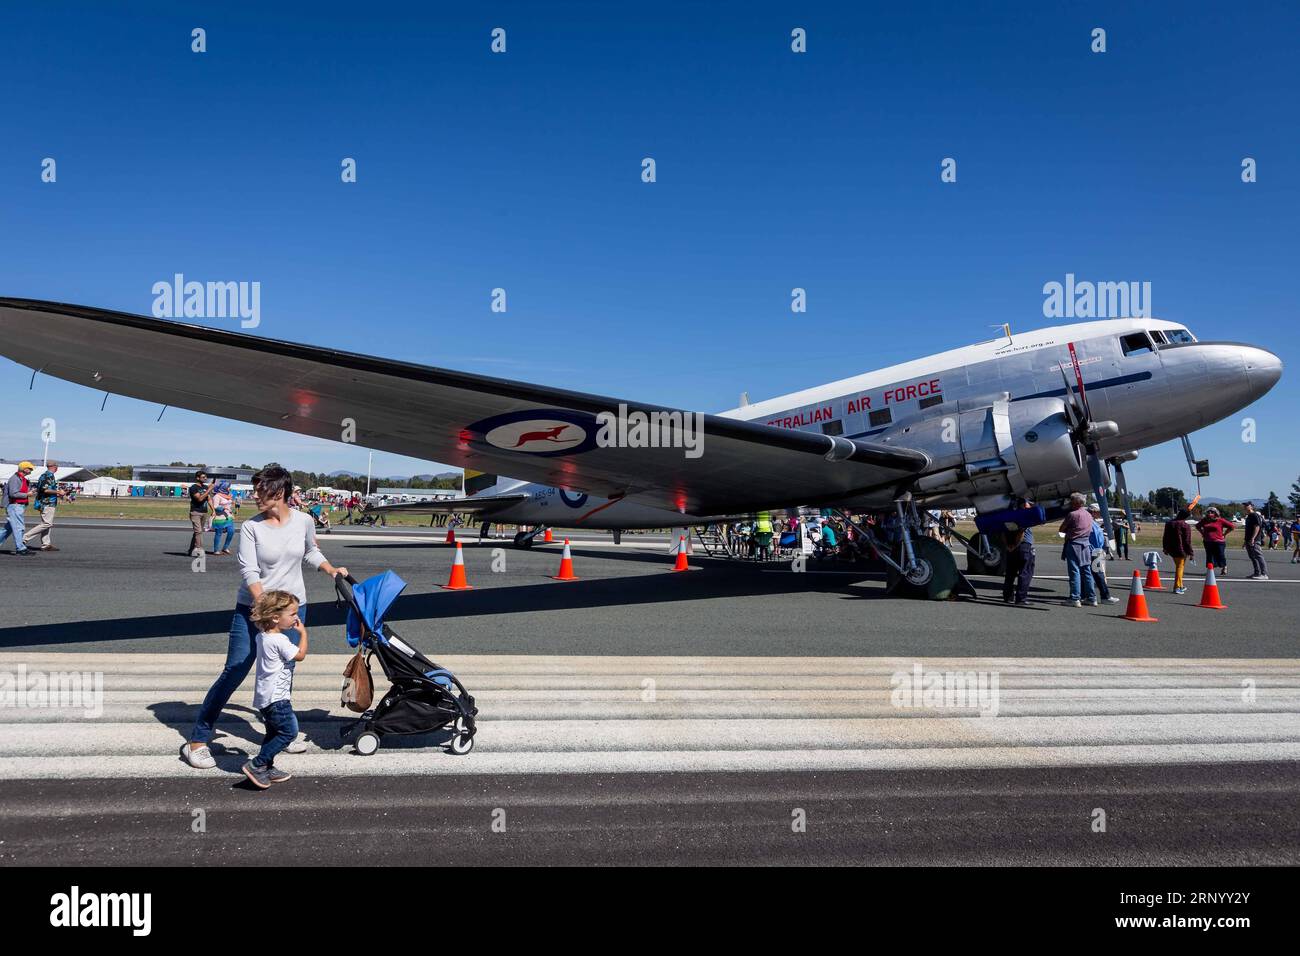 (180408) -- CANBERRA, April 8, 2018 -- Visitors view an old model of Royal Australian Airforce aircraft during the Canberra Airport Open Day in Canberra, Australia, on April 8, 2018. ) (zf) AUSTRALIA-CANBERRA-AIRPORT-OPEN DAY ZhuxNan PUBLICATIONxNOTxINxCHN Stock Photo